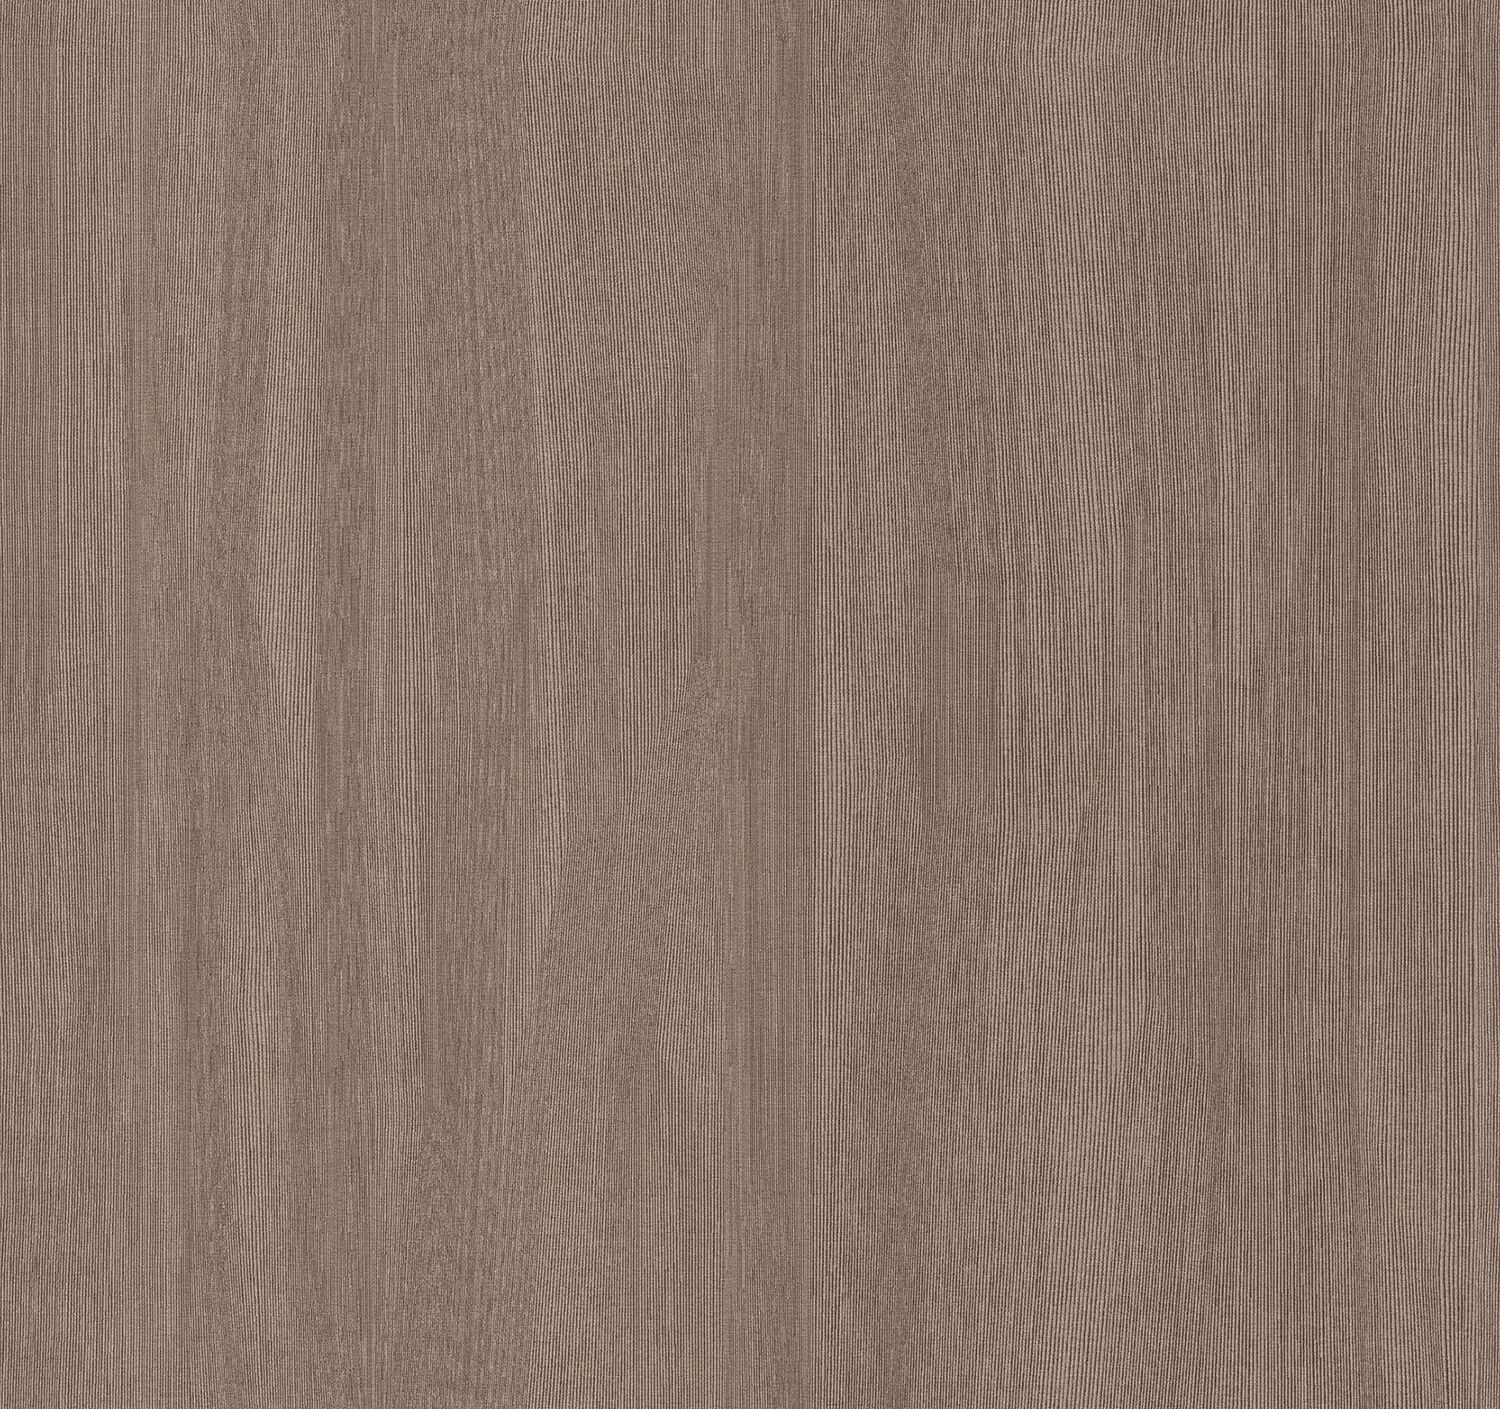 Juxtapose - Rosewood - 7020 - 06 Tileable Swatches